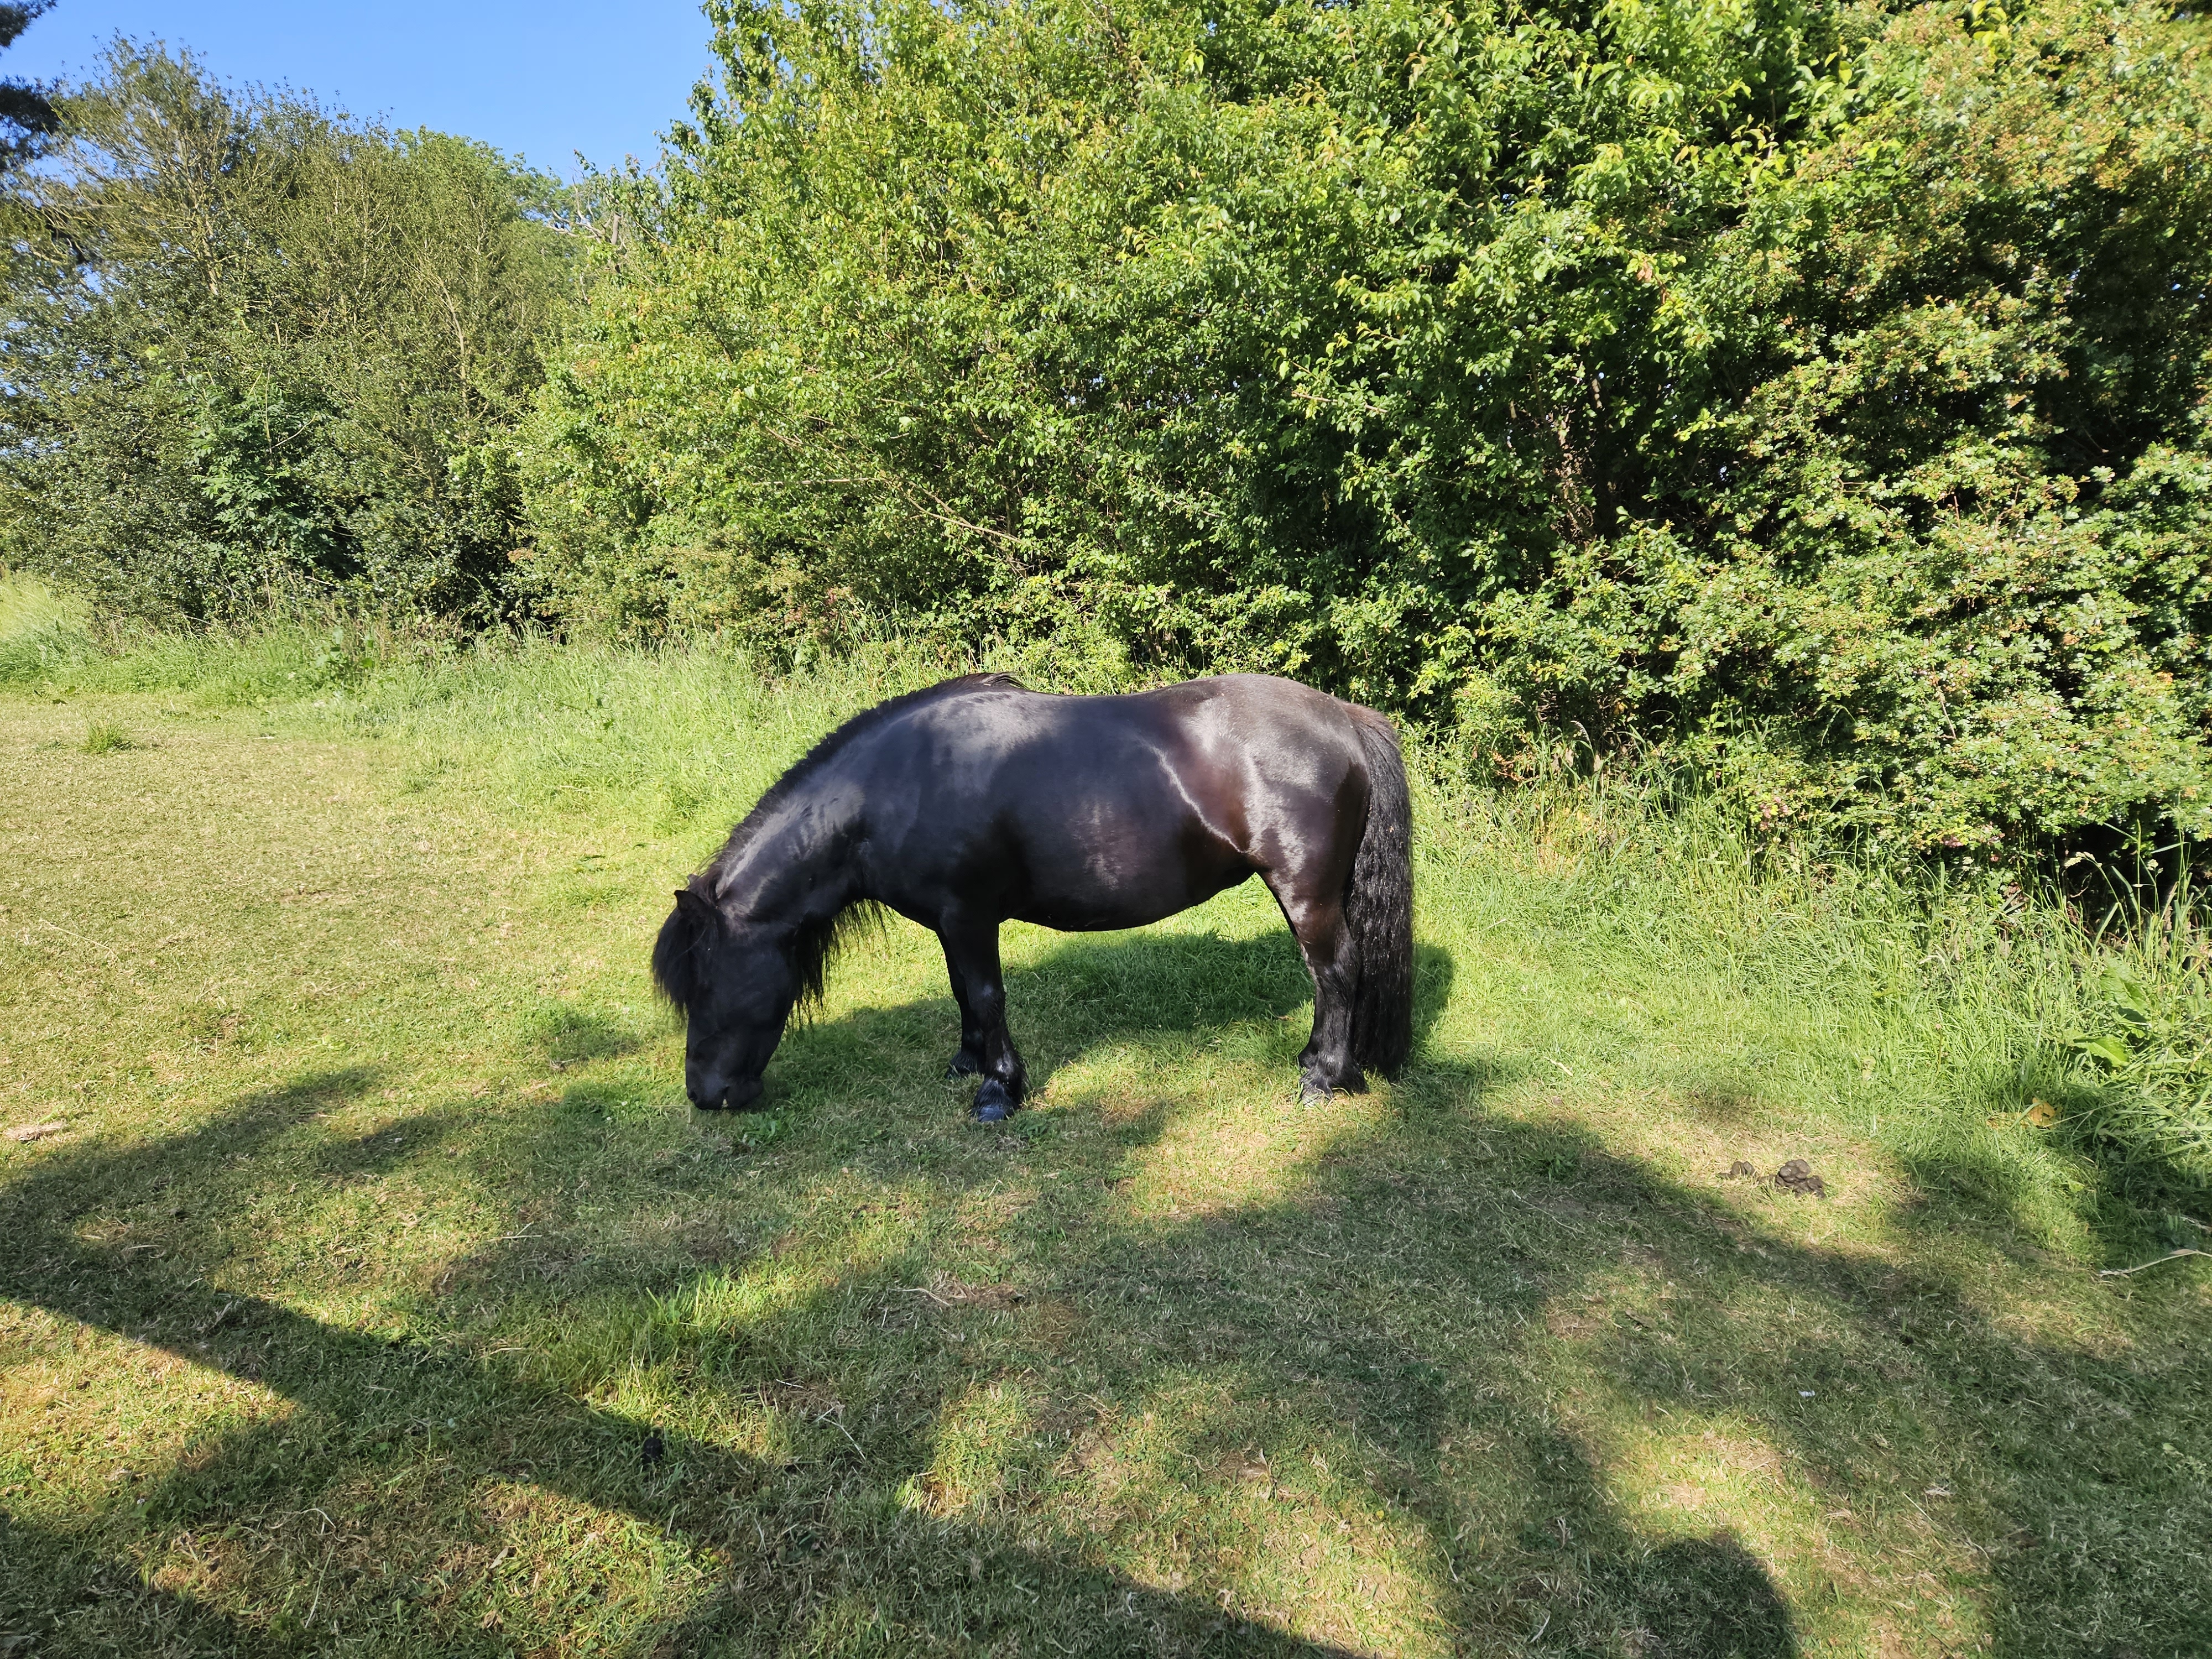 The Not-So-Secret Diary of Diva the Shetland Pony - Too Much Grass!